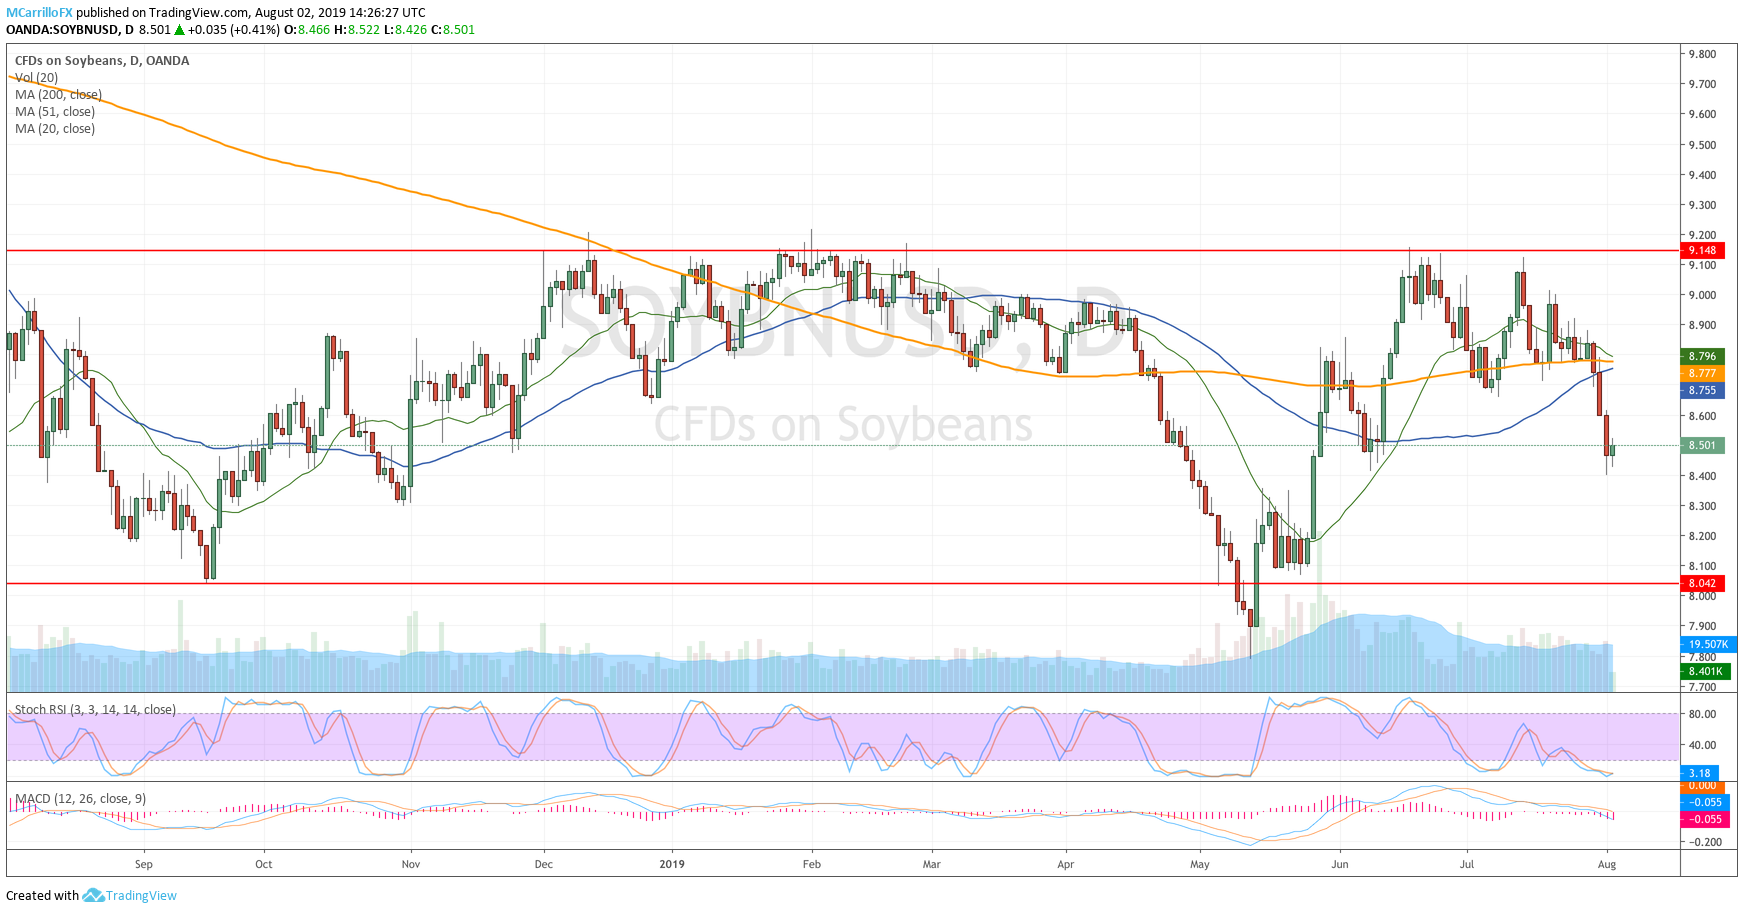 Price of soybeans daily chart Aug 2